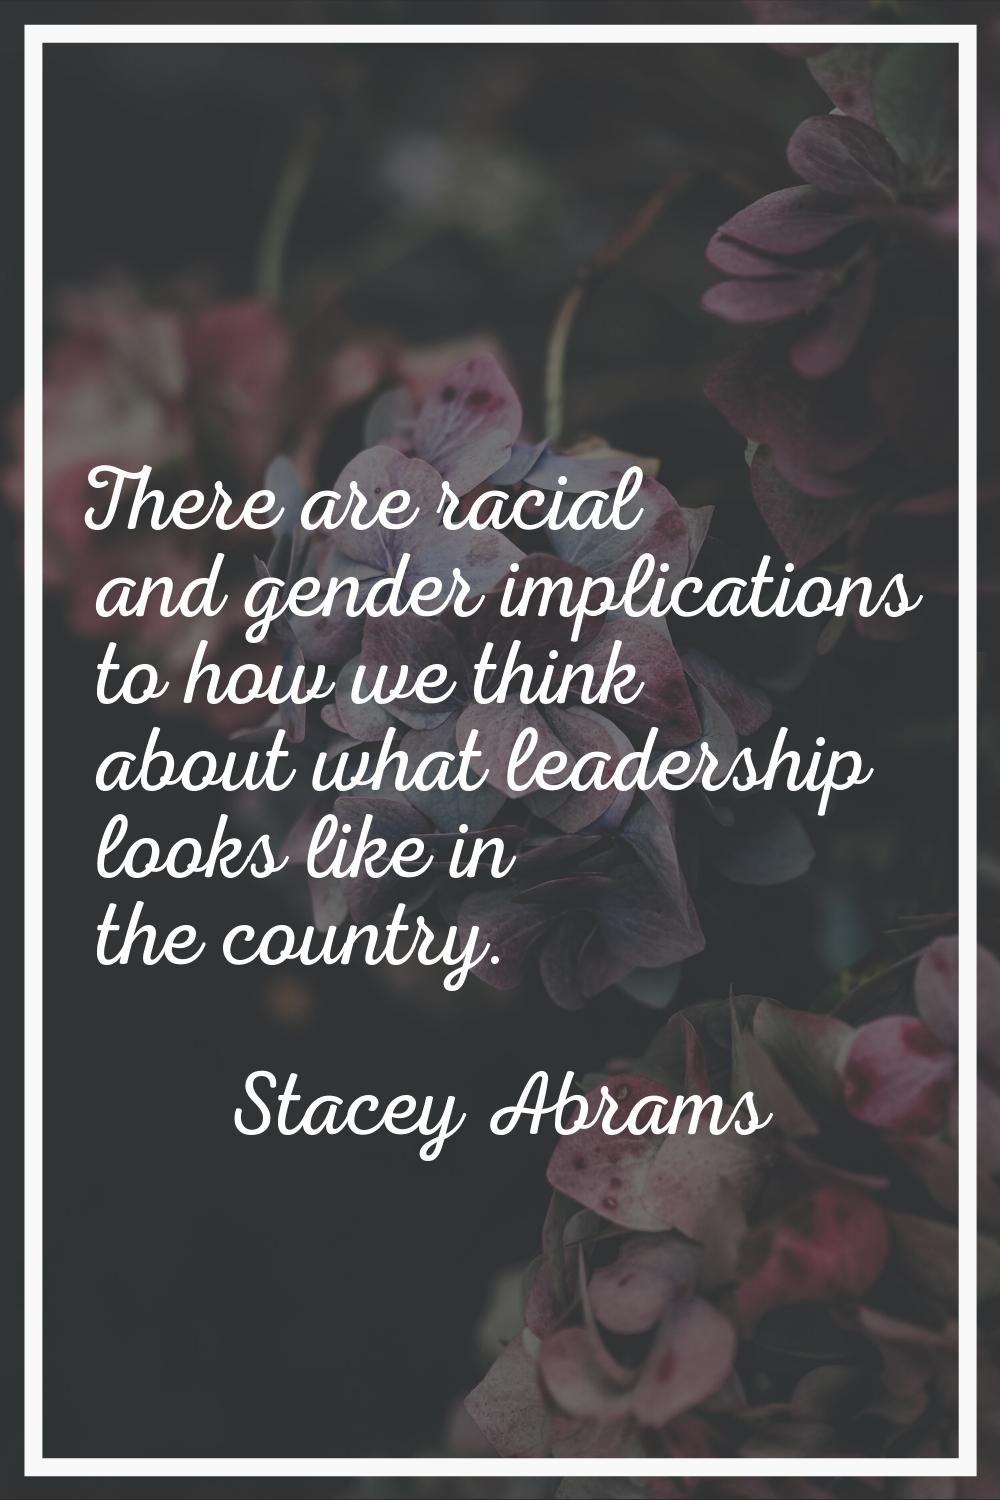 There are racial and gender implications to how we think about what leadership looks like in the co